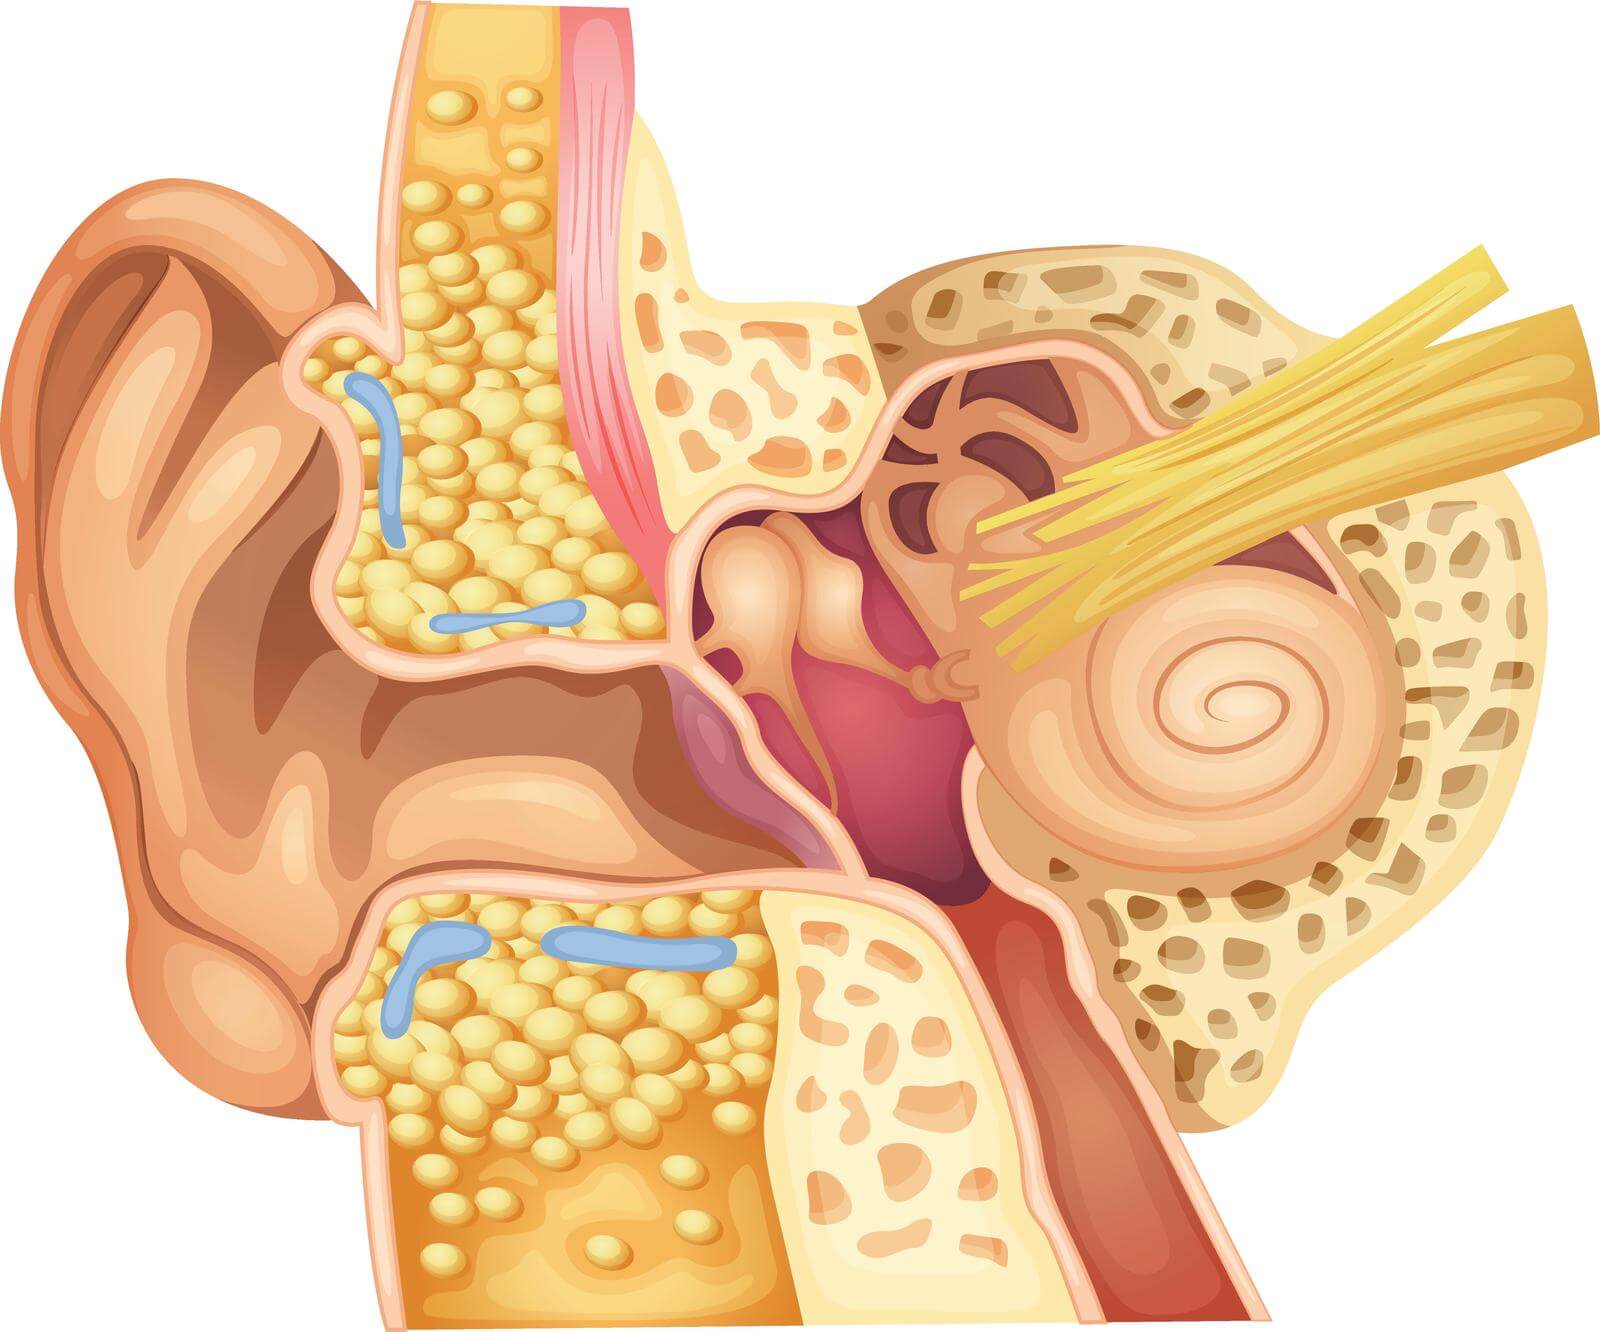 A concept drawing of the inner ear.